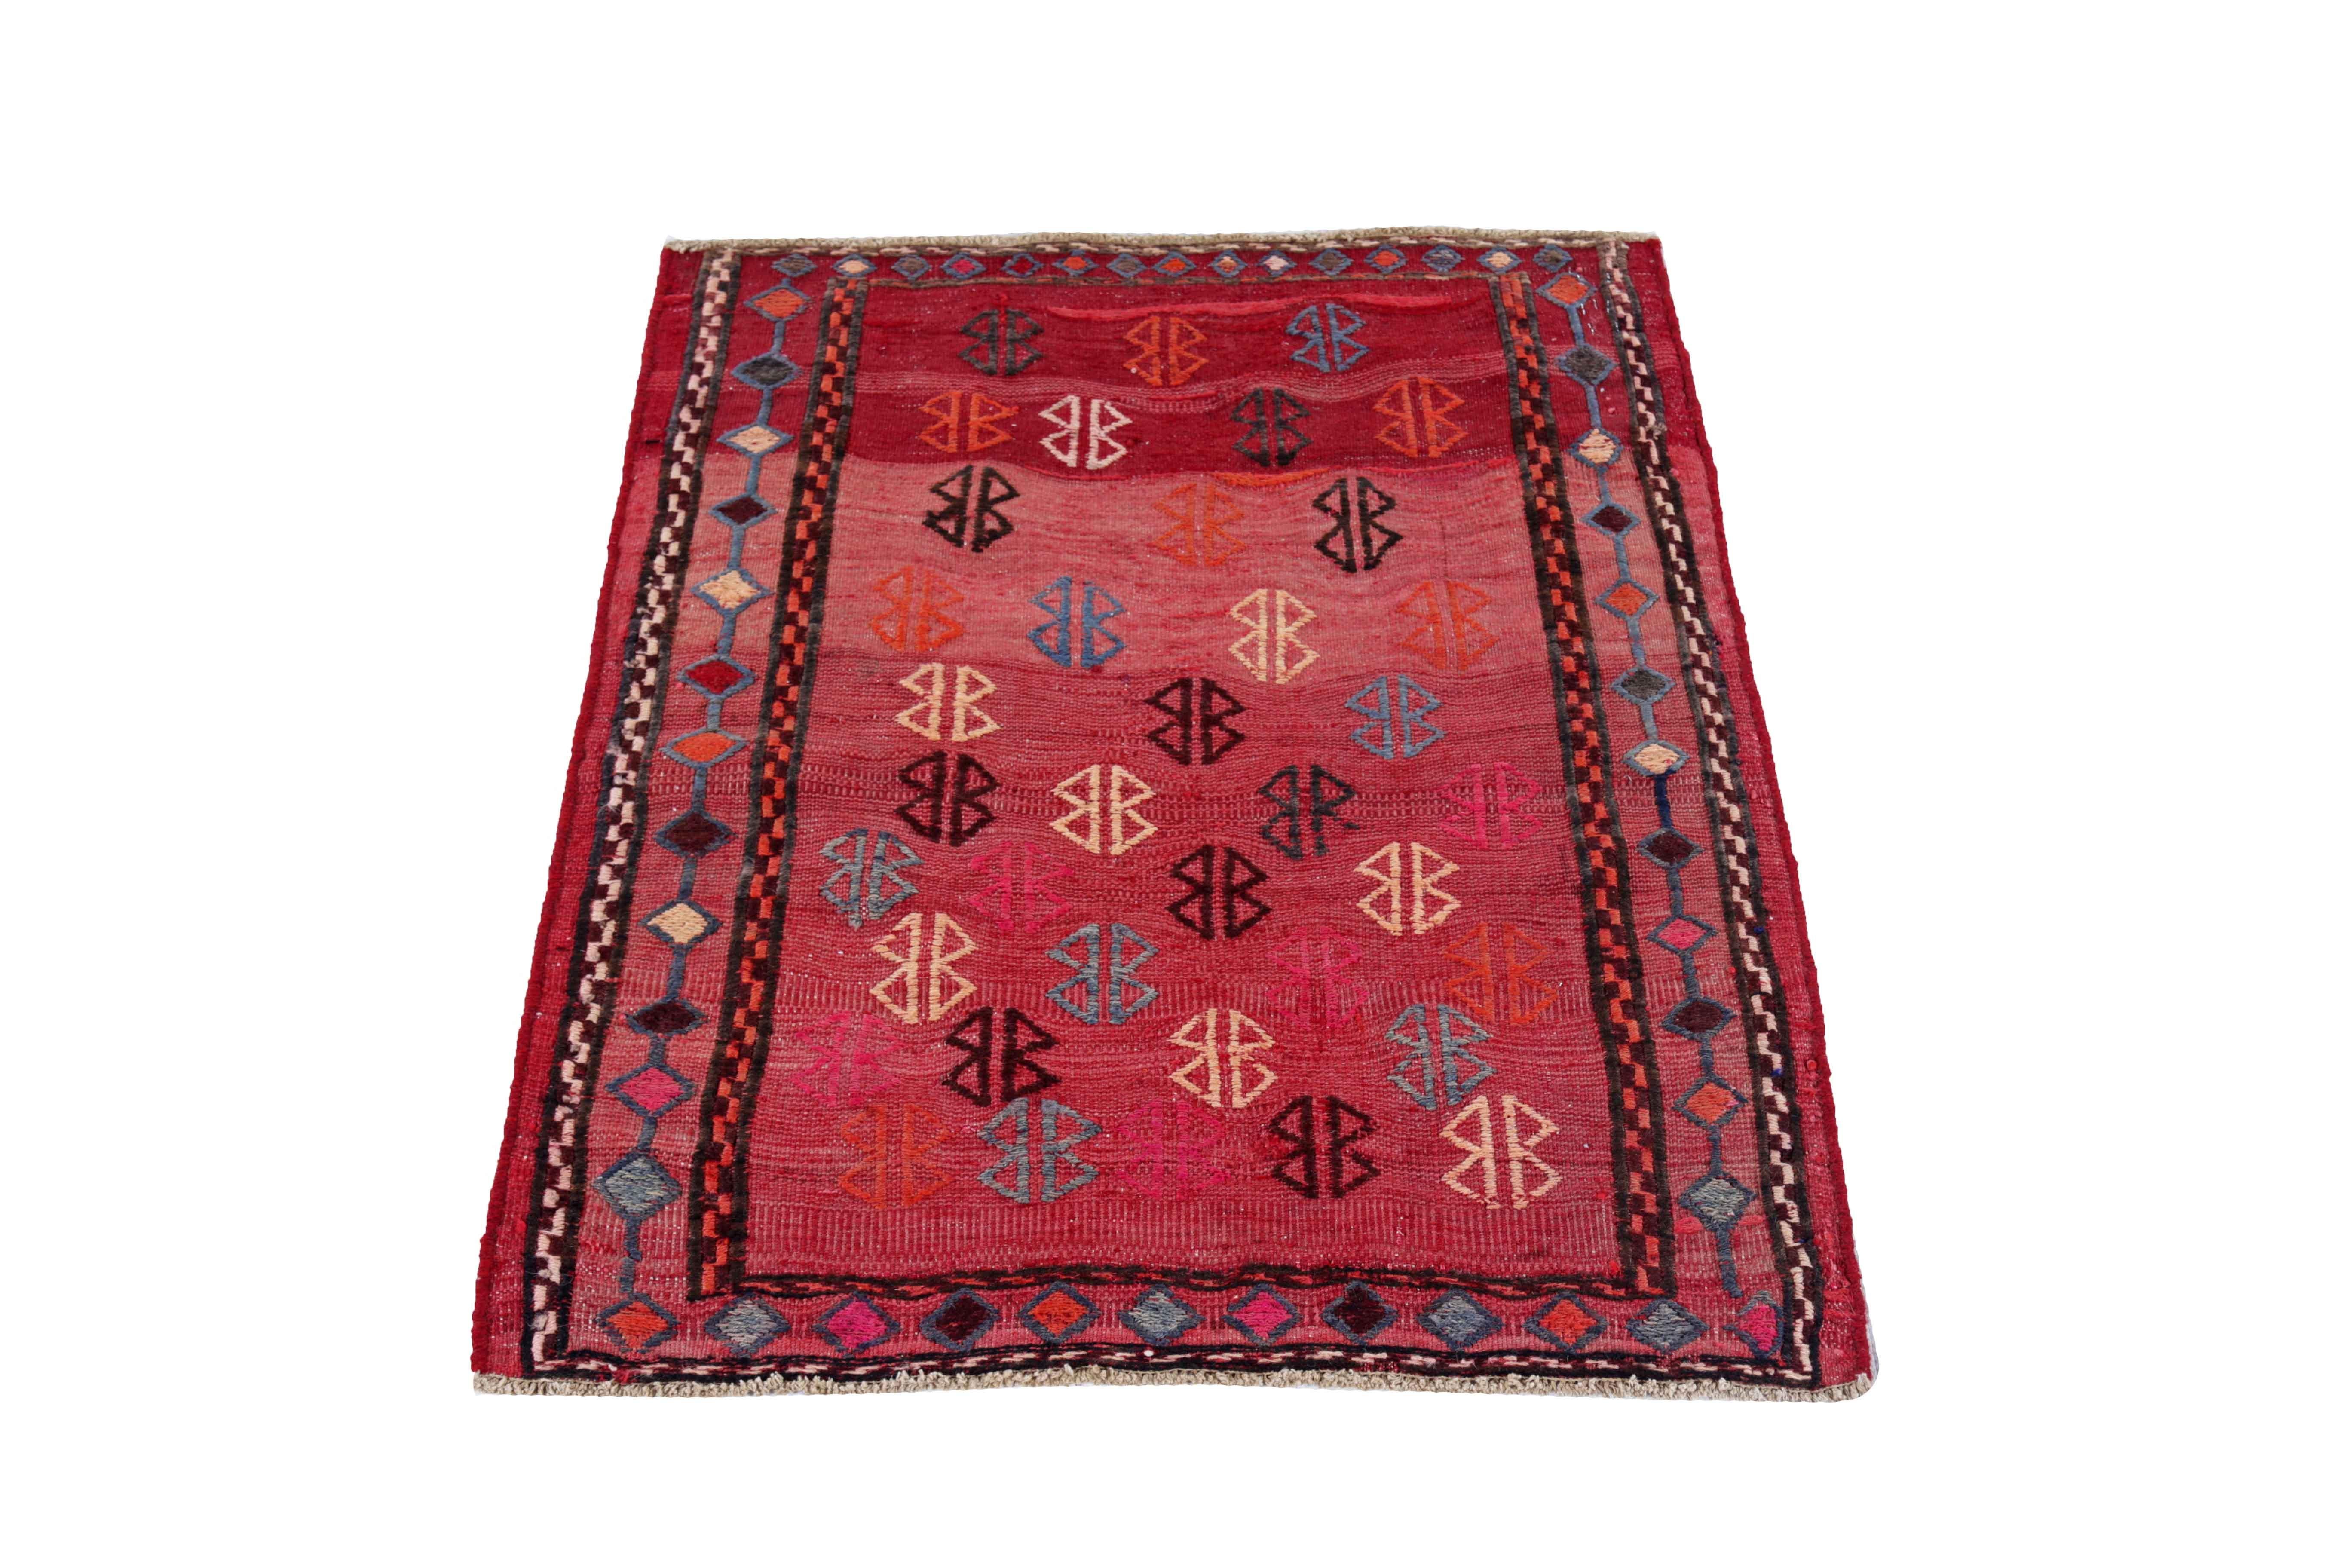 Antique Persian square rug handwoven from the finest sheep’s wool. It’s colored with all-natural vegetable dyes that are safe for humans and pets. It’s a traditional Kilim design handwoven by expert artisans. It’s a lovely square rug that can be